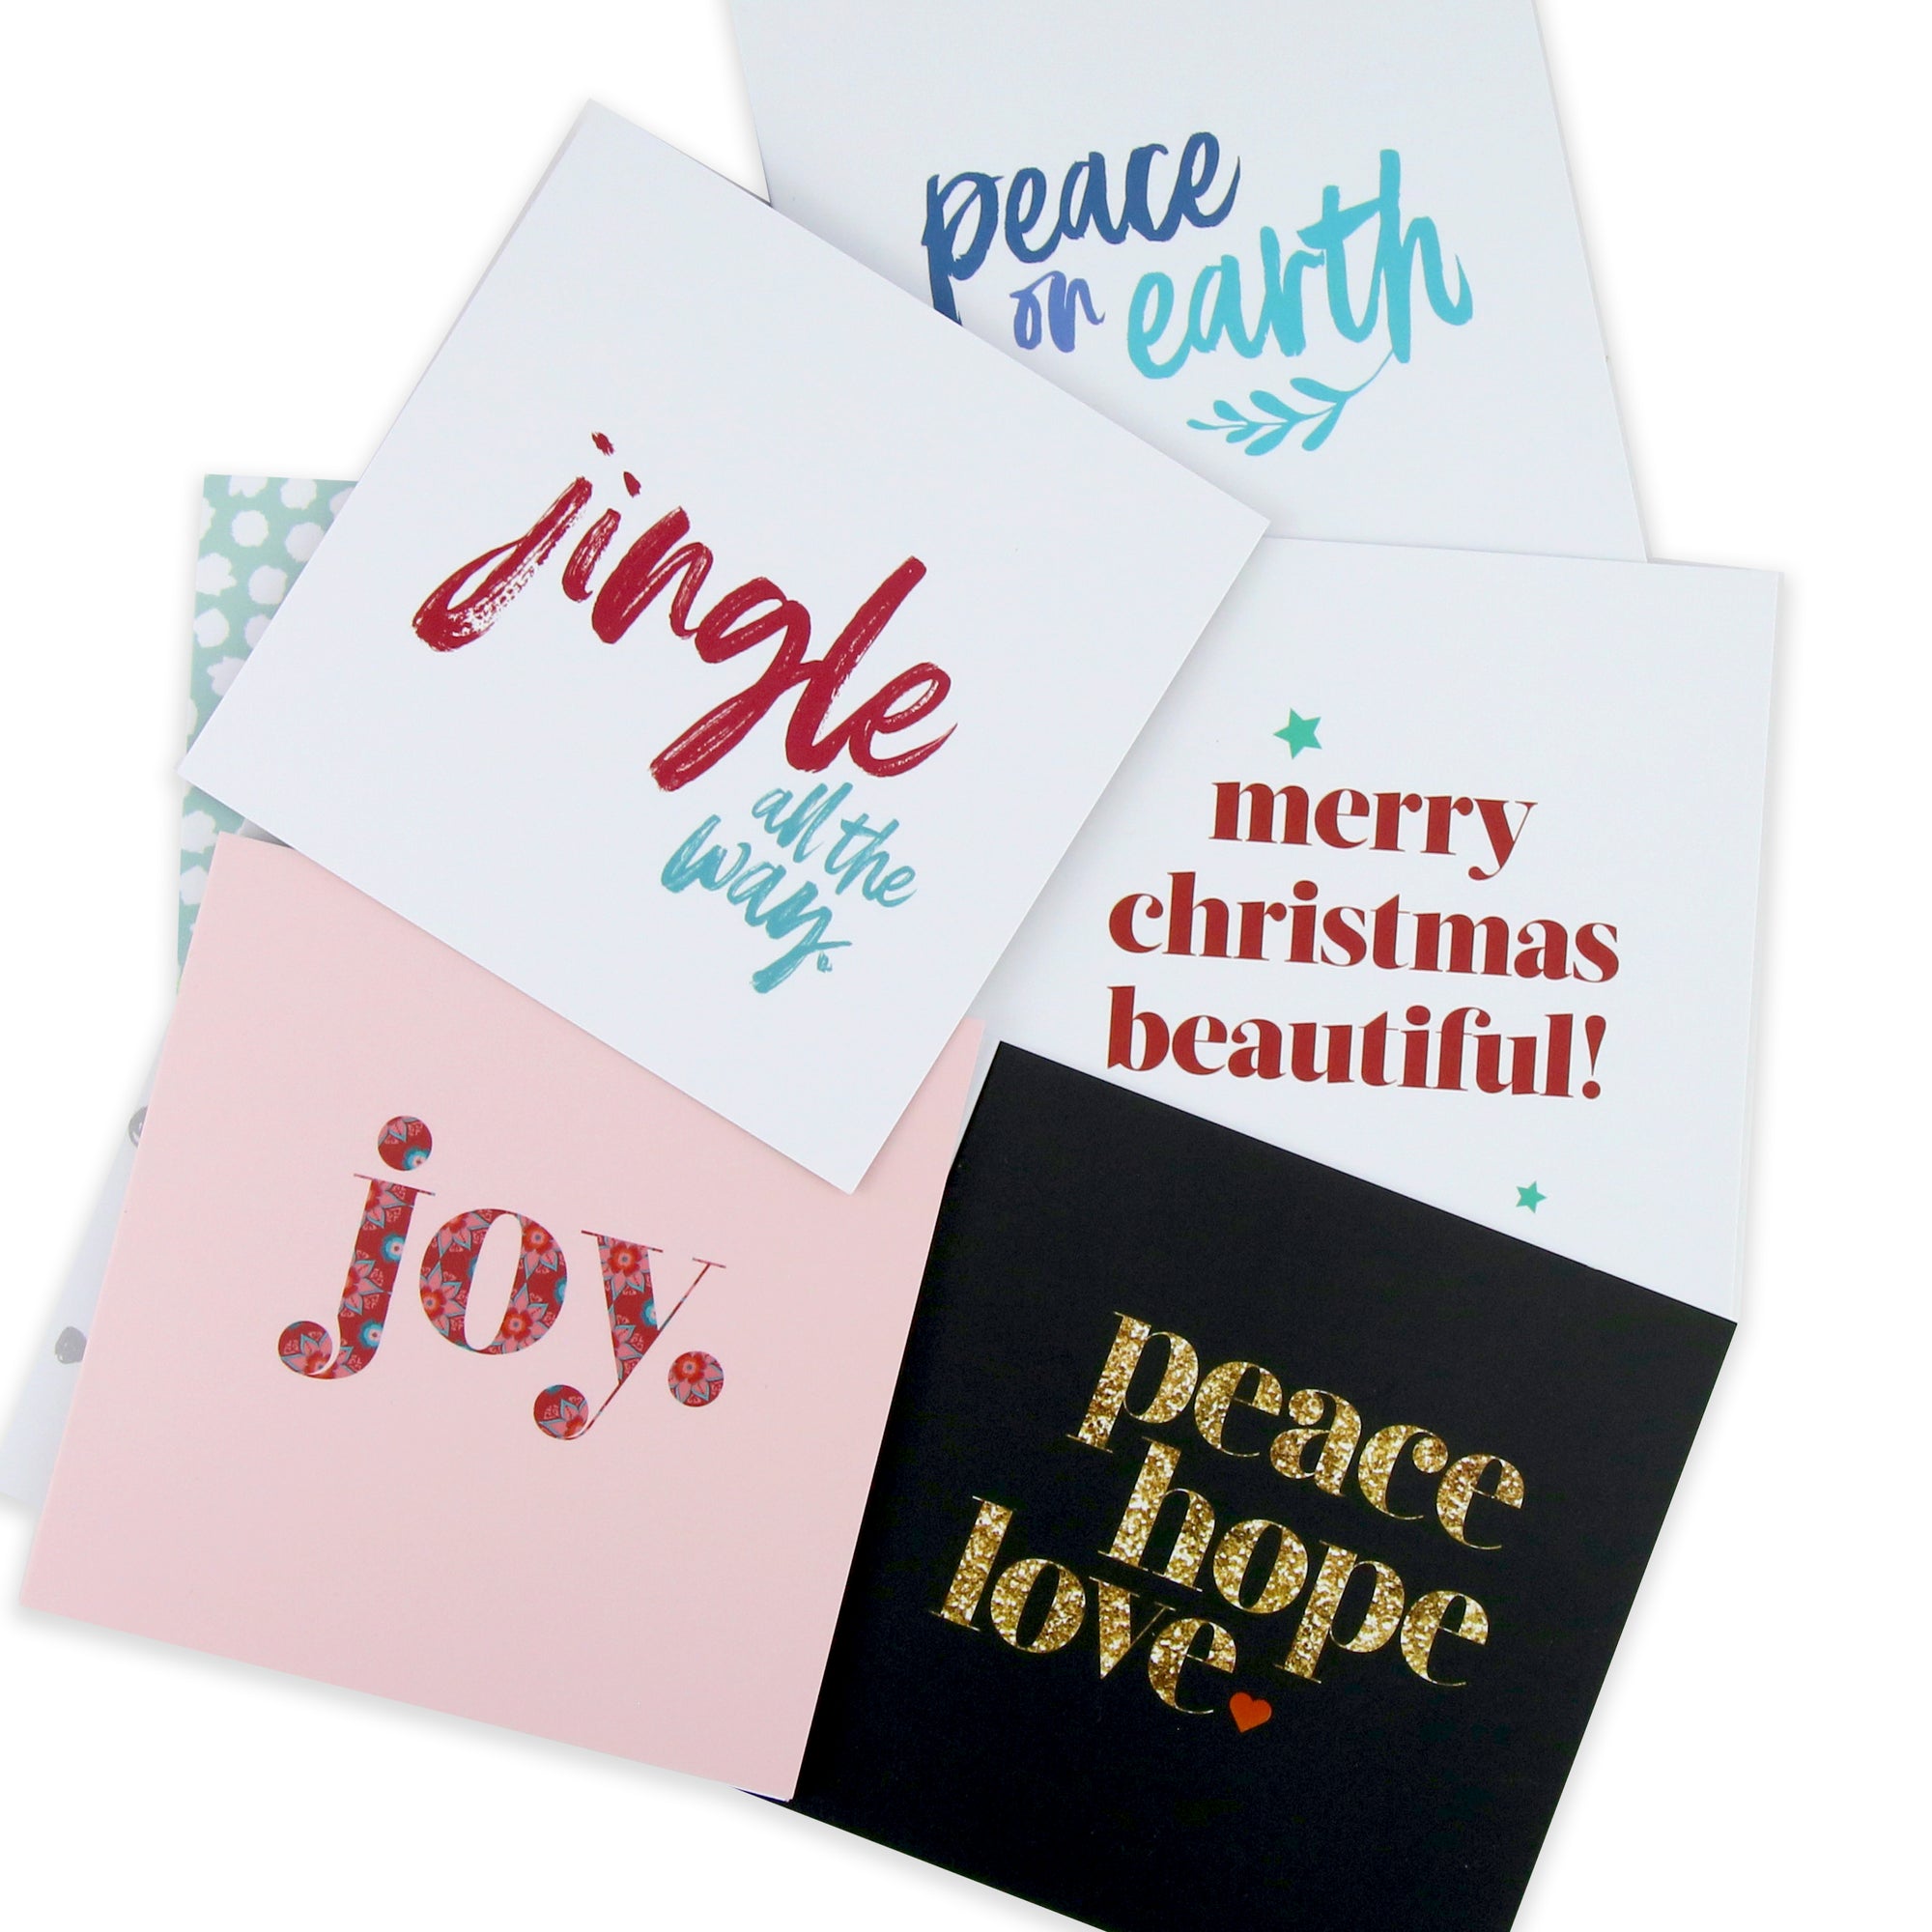 GIFT CARDS Pk 5 With Envelopes - Merry Christmas (7003-2)